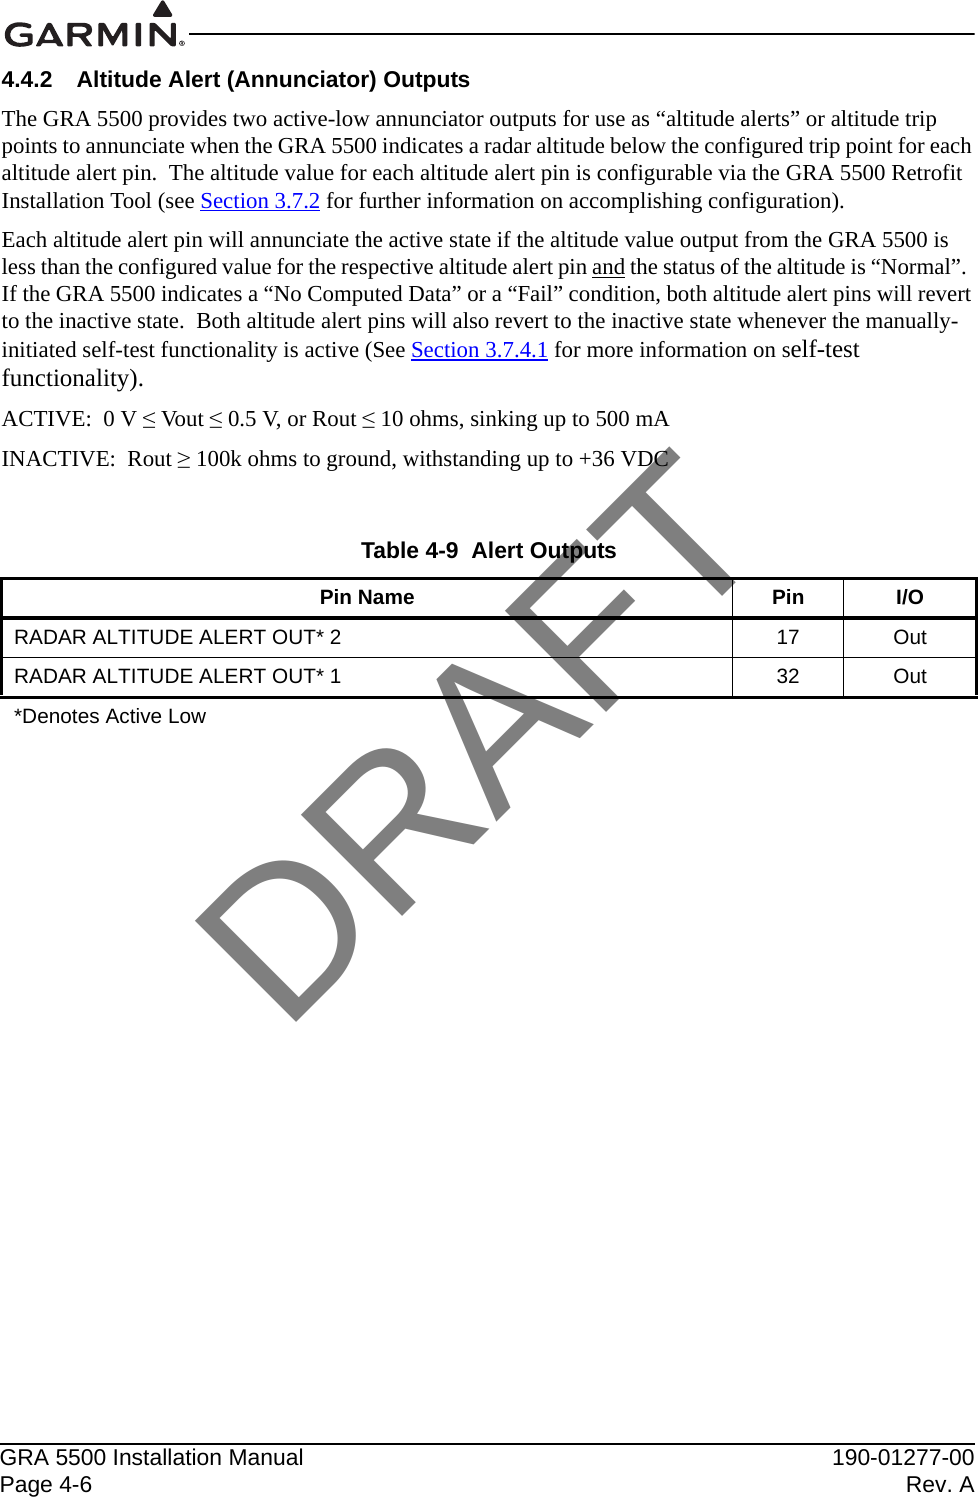 GRA 5500 Installation Manual 190-01277-00Page 4-6 Rev. A4.4.2 Altitude Alert (Annunciator) Outputs The GRA 5500 provides two active-low annunciator outputs for use as “altitude alerts” or altitude trip points to annunciate when the GRA 5500 indicates a radar altitude below the configured trip point for each altitude alert pin.  The altitude value for each altitude alert pin is configurable via the GRA 5500 Retrofit Installation Tool (see Section 3.7.2 for further information on accomplishing configuration).Each altitude alert pin will annunciate the active state if the altitude value output from the GRA 5500 is less than the configured value for the respective altitude alert pin and the status of the altitude is “Normal”.  If the GRA 5500 indicates a “No Computed Data” or a “Fail” condition, both altitude alert pins will revert to the inactive state.  Both altitude alert pins will also revert to the inactive state whenever the manually-initiated self-test functionality is active (See Section 3.7.4.1 for more information on self-test functionality).ACTIVE:  0 V ≤ Vout ≤ 0.5 V, or Rout ≤ 10 ohms, sinking up to 500 mAINACTIVE:  Rout ≥ 100k ohms to ground, withstanding up to +36 VDCTable 4-9  Alert OutputsPin Name Pin I/ORADAR ALTITUDE ALERT OUT* 2 17 OutRADAR ALTITUDE ALERT OUT* 1 32 Out*Denotes Active LowDRAFT